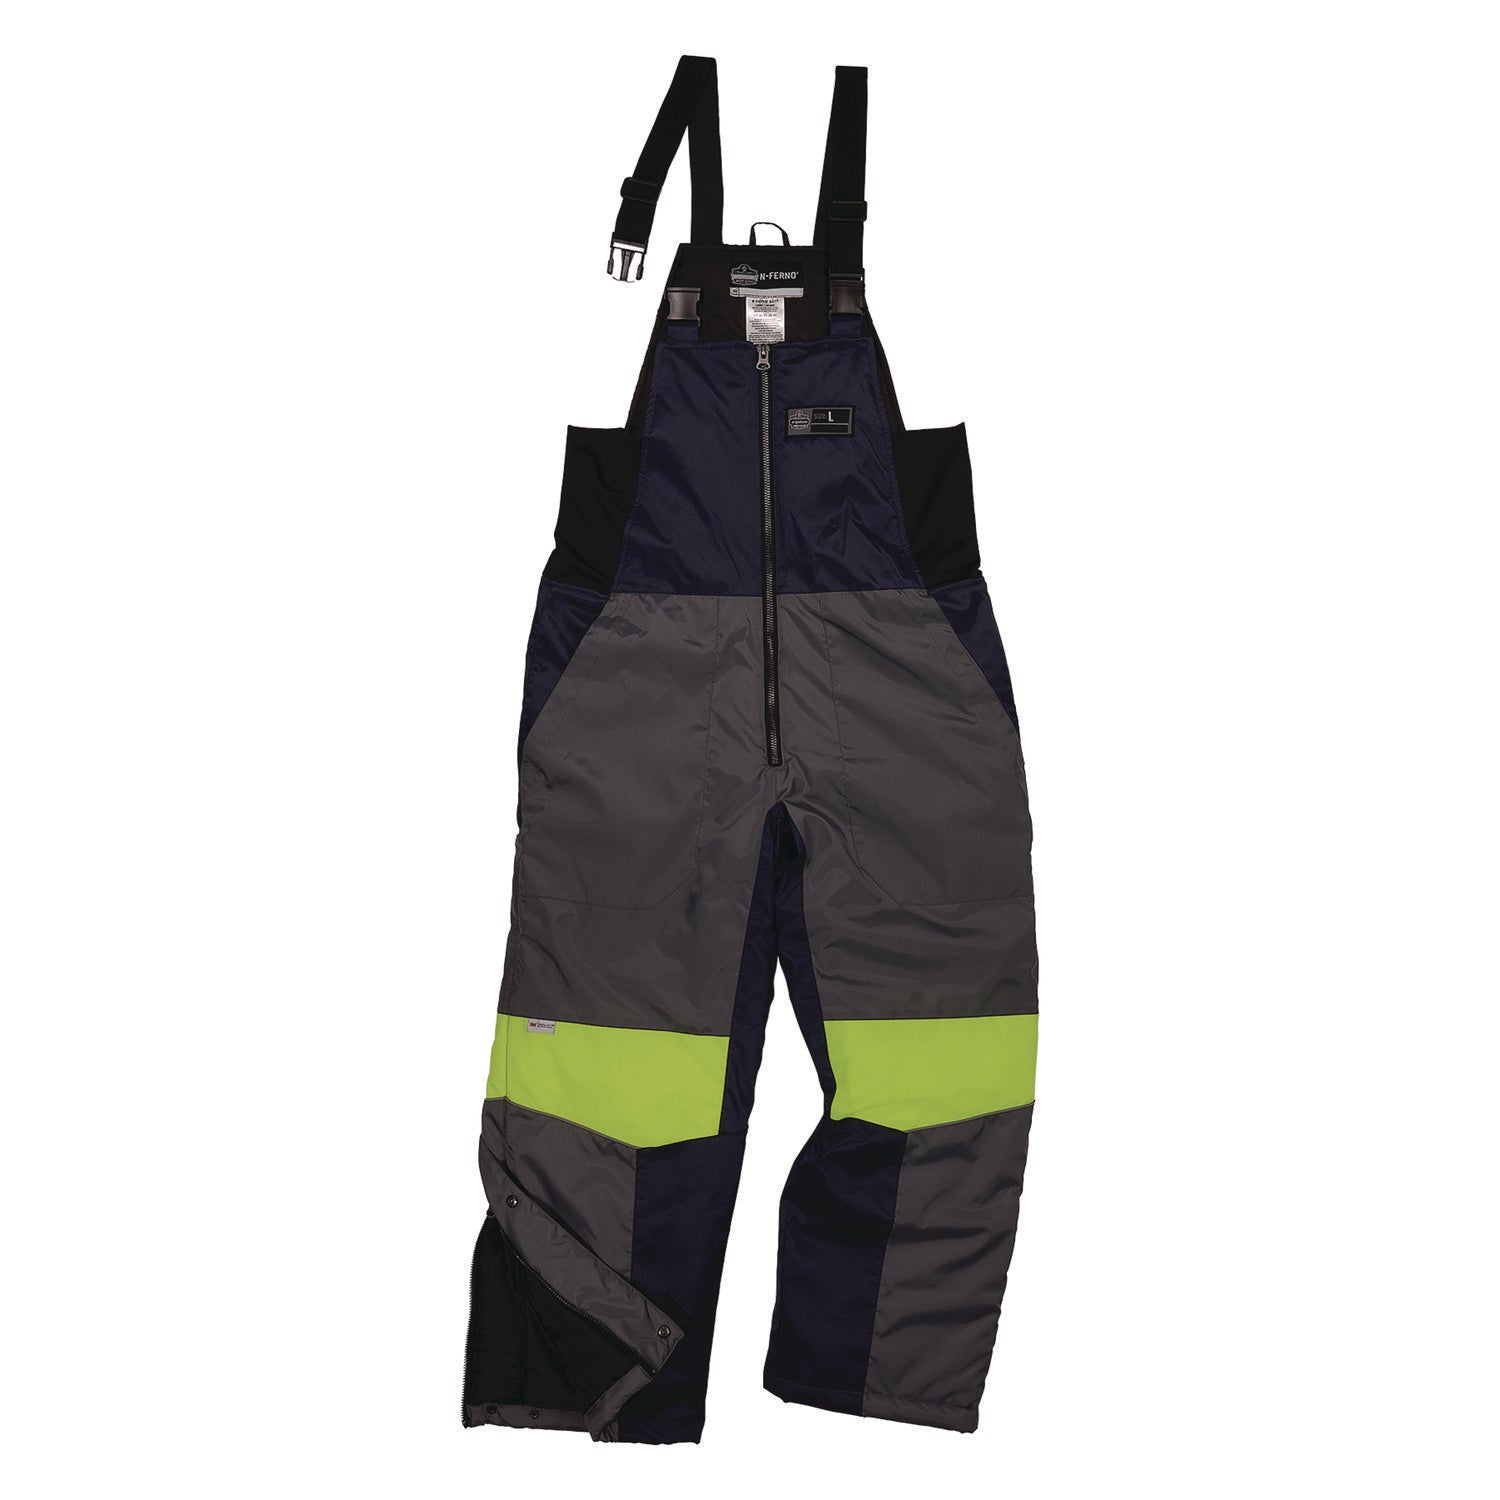 n-ferno-6477-insulated-cooler-bib-overall-3x-large-navy-ships-in-1-3-business-days_ego41267 - 1